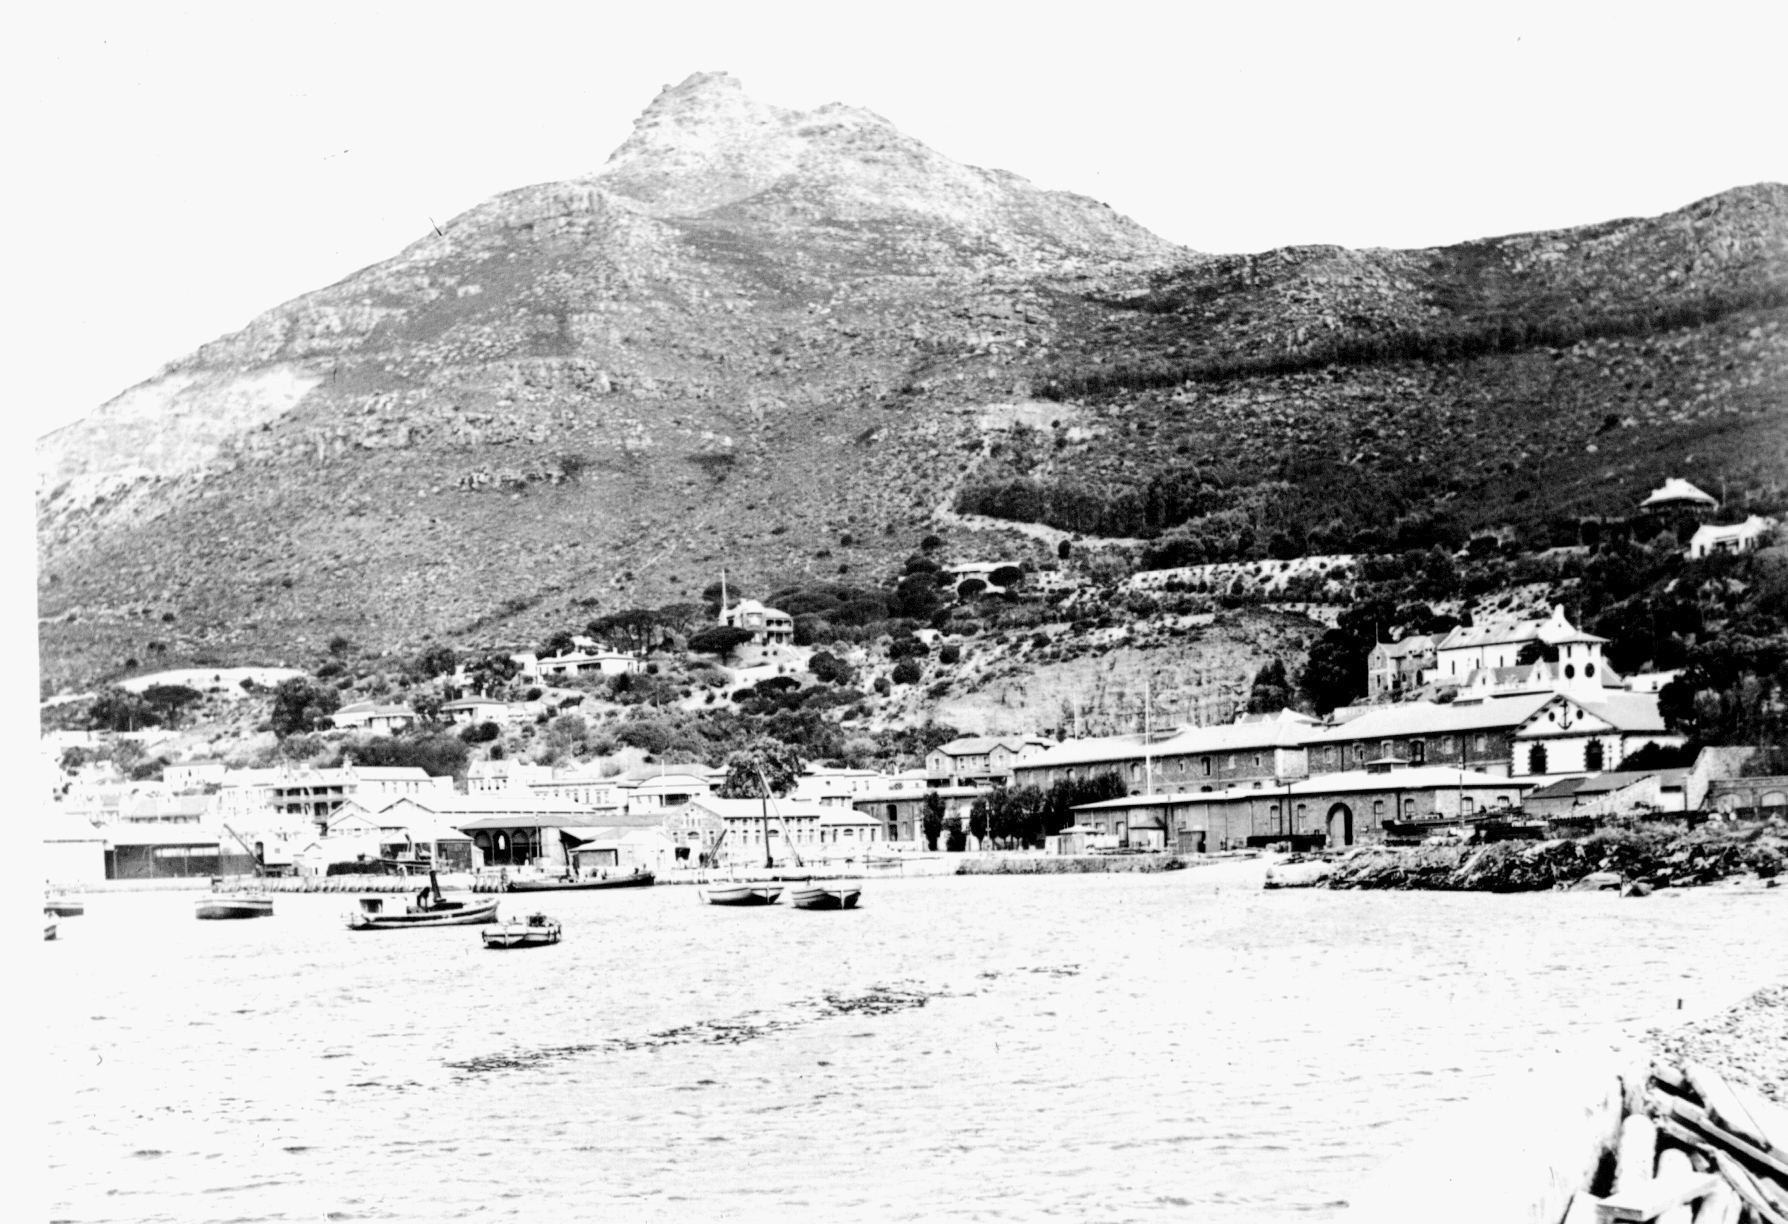 Simon's Town in circa 1900 when most of the Jewish residents had settled there.